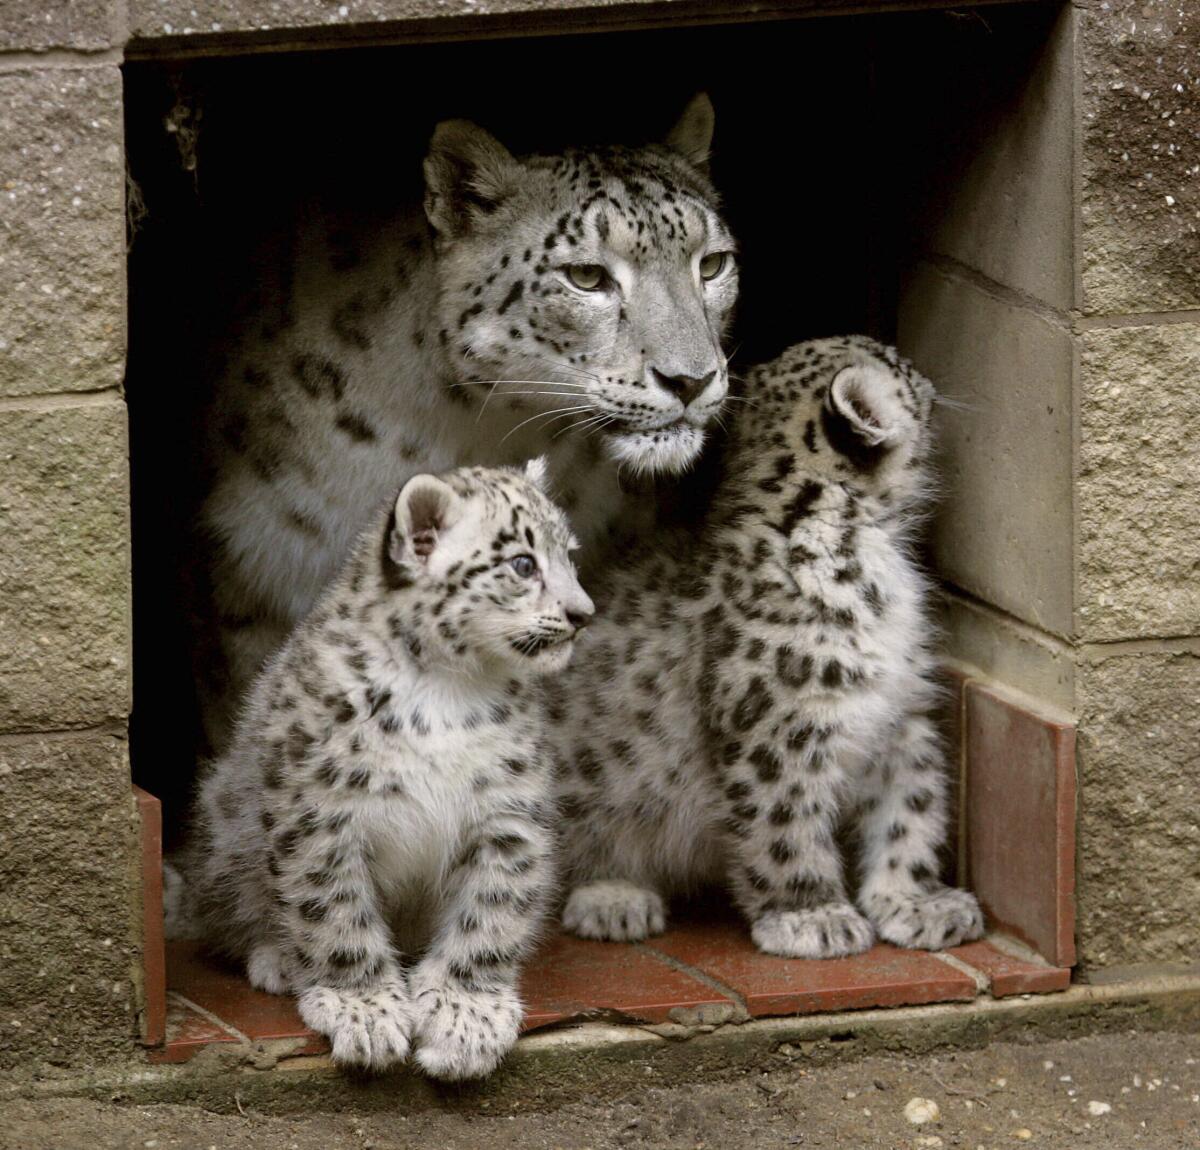 FILE - In this July 15, 2010, file photo, two snow leopard cubs born two months earlier stand next to their mother, Himani, at the entrance to their den at the Cape May County Zoo in Cape May Court House, N.J. Himani, who gained national attention for giving birth to seven cubs, has died at 17 years old, the zoo said Sunday, Feb. 14, 2021. Himani, who reared four litters of cubs at a time when snow leopard breeding success was at a low point, was “peacefully euthanized following a battle with cancer” on Friday, according to a press release from Cape May County. (Dale Gerhard/The Press of Atlantic City via AP, File)